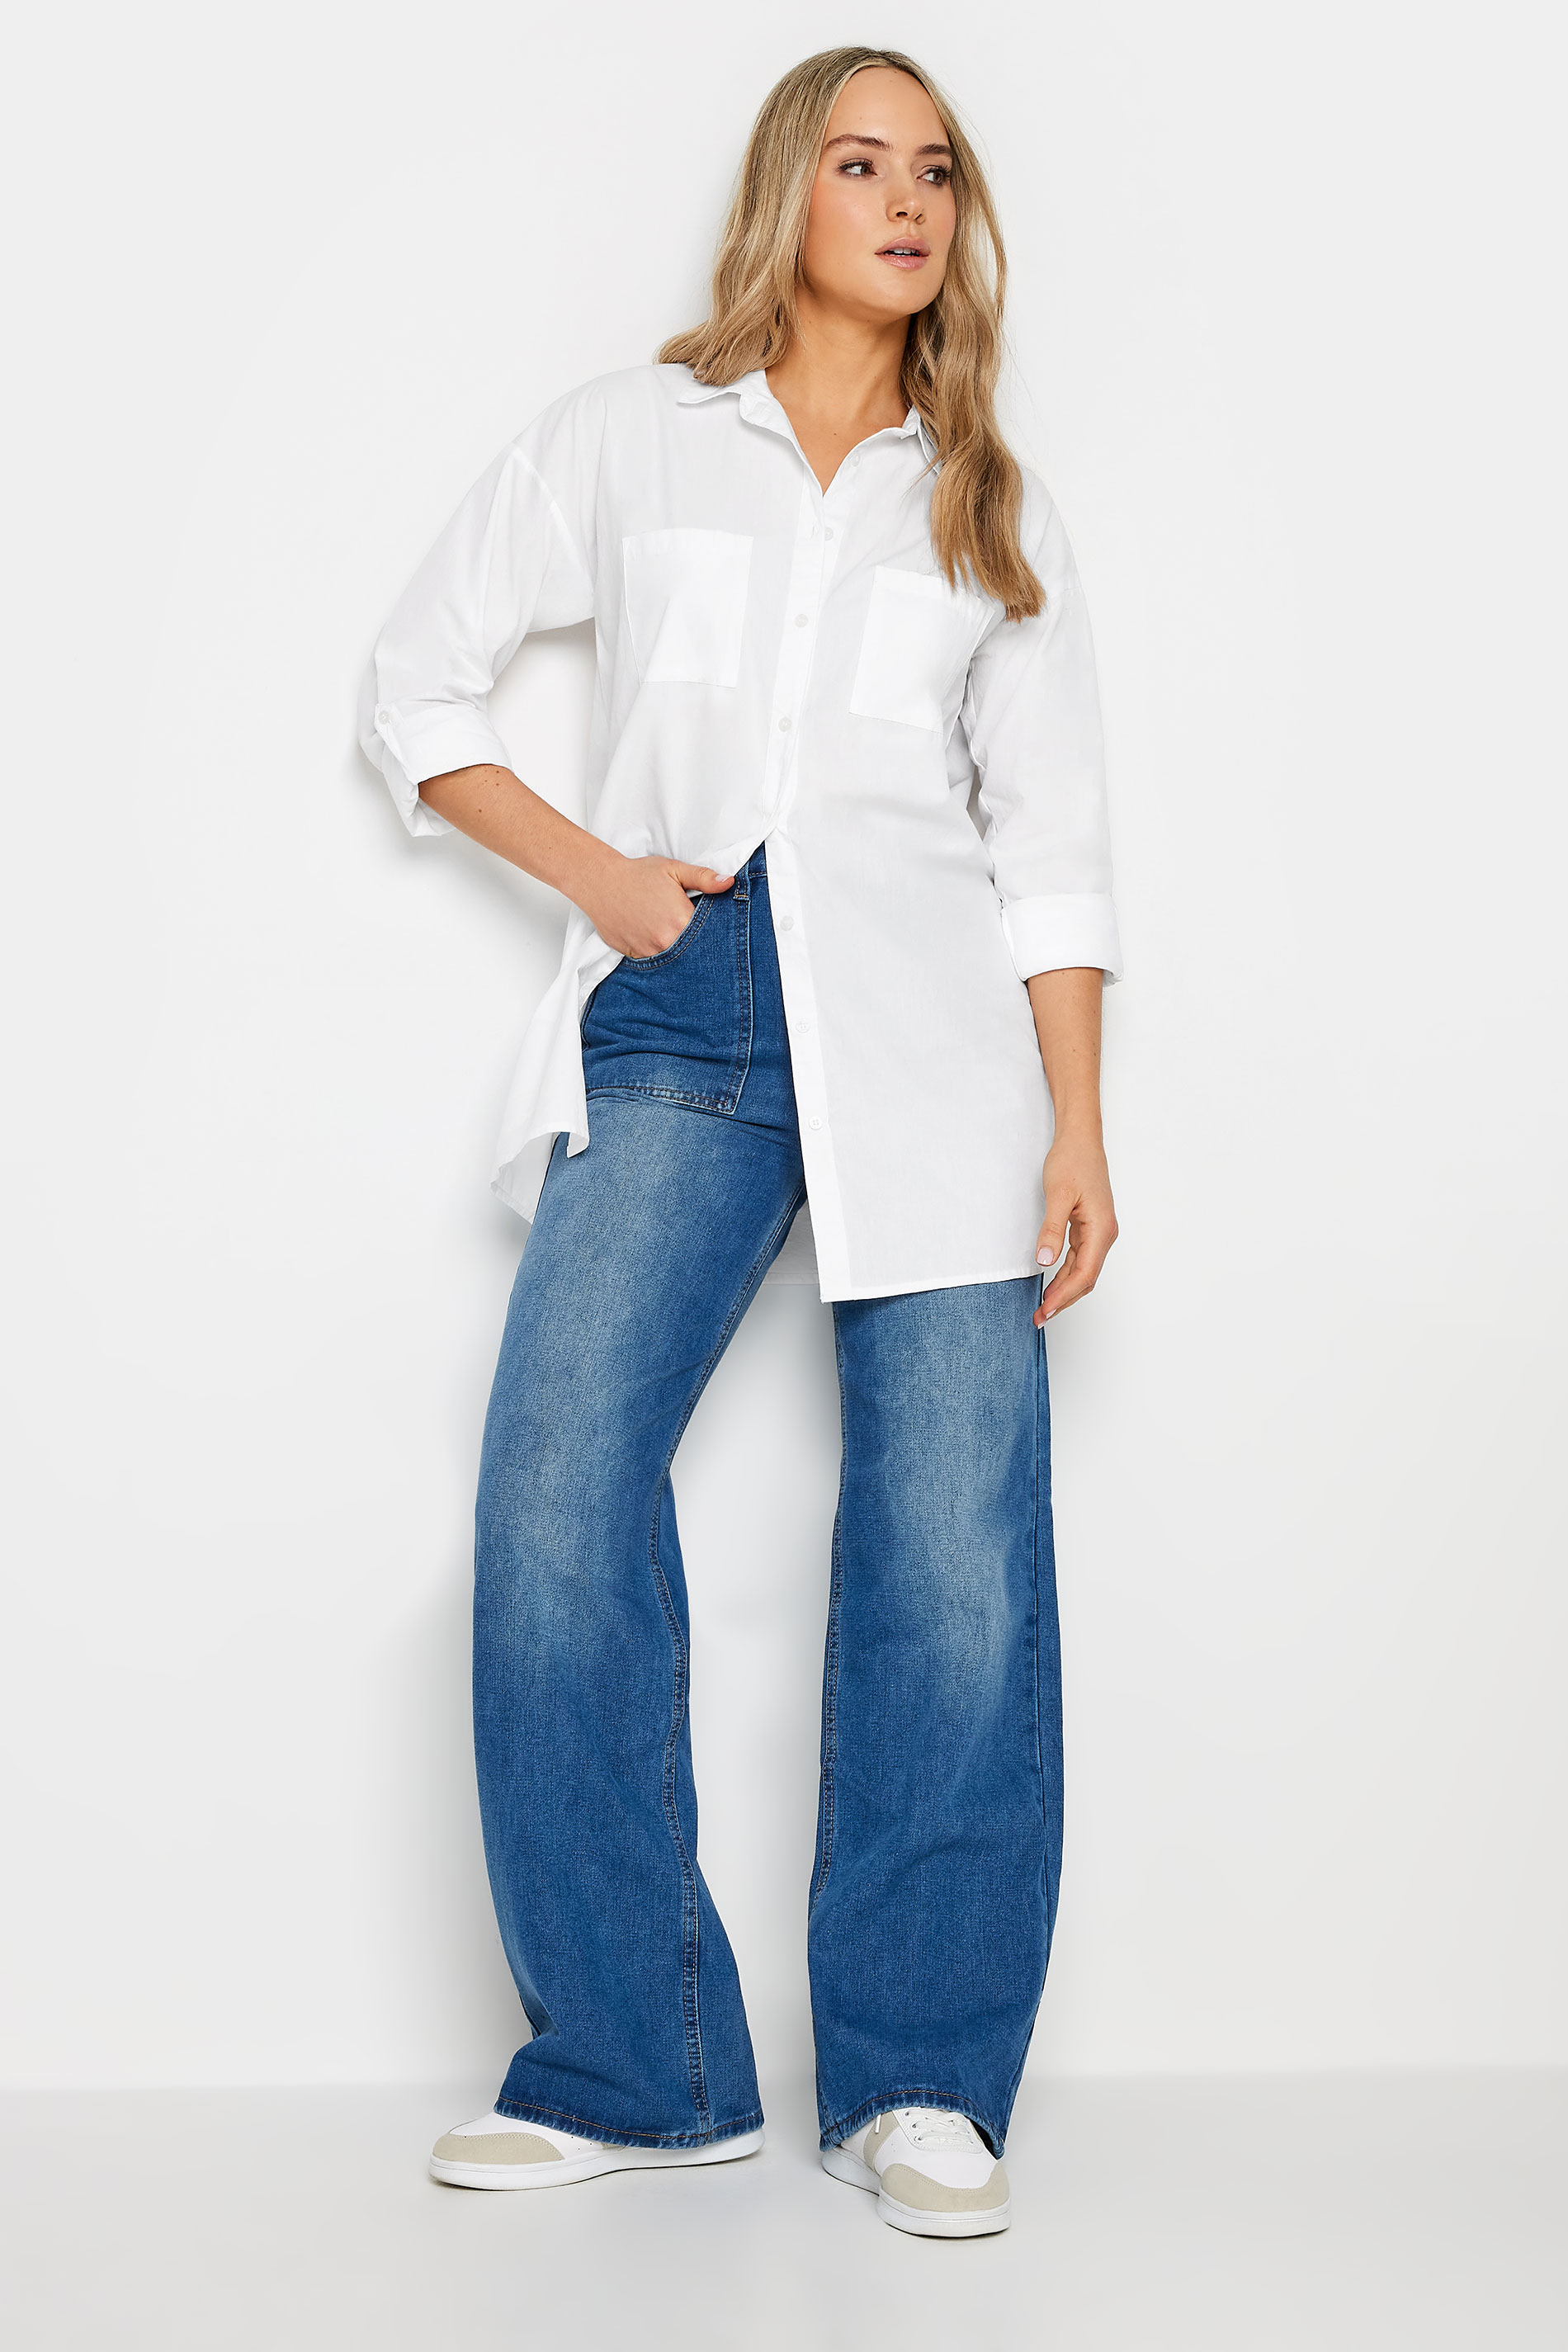 LTS MADE FOR GOOD Tall White Cotton Oversized Shirt | Long Tall Sally 2